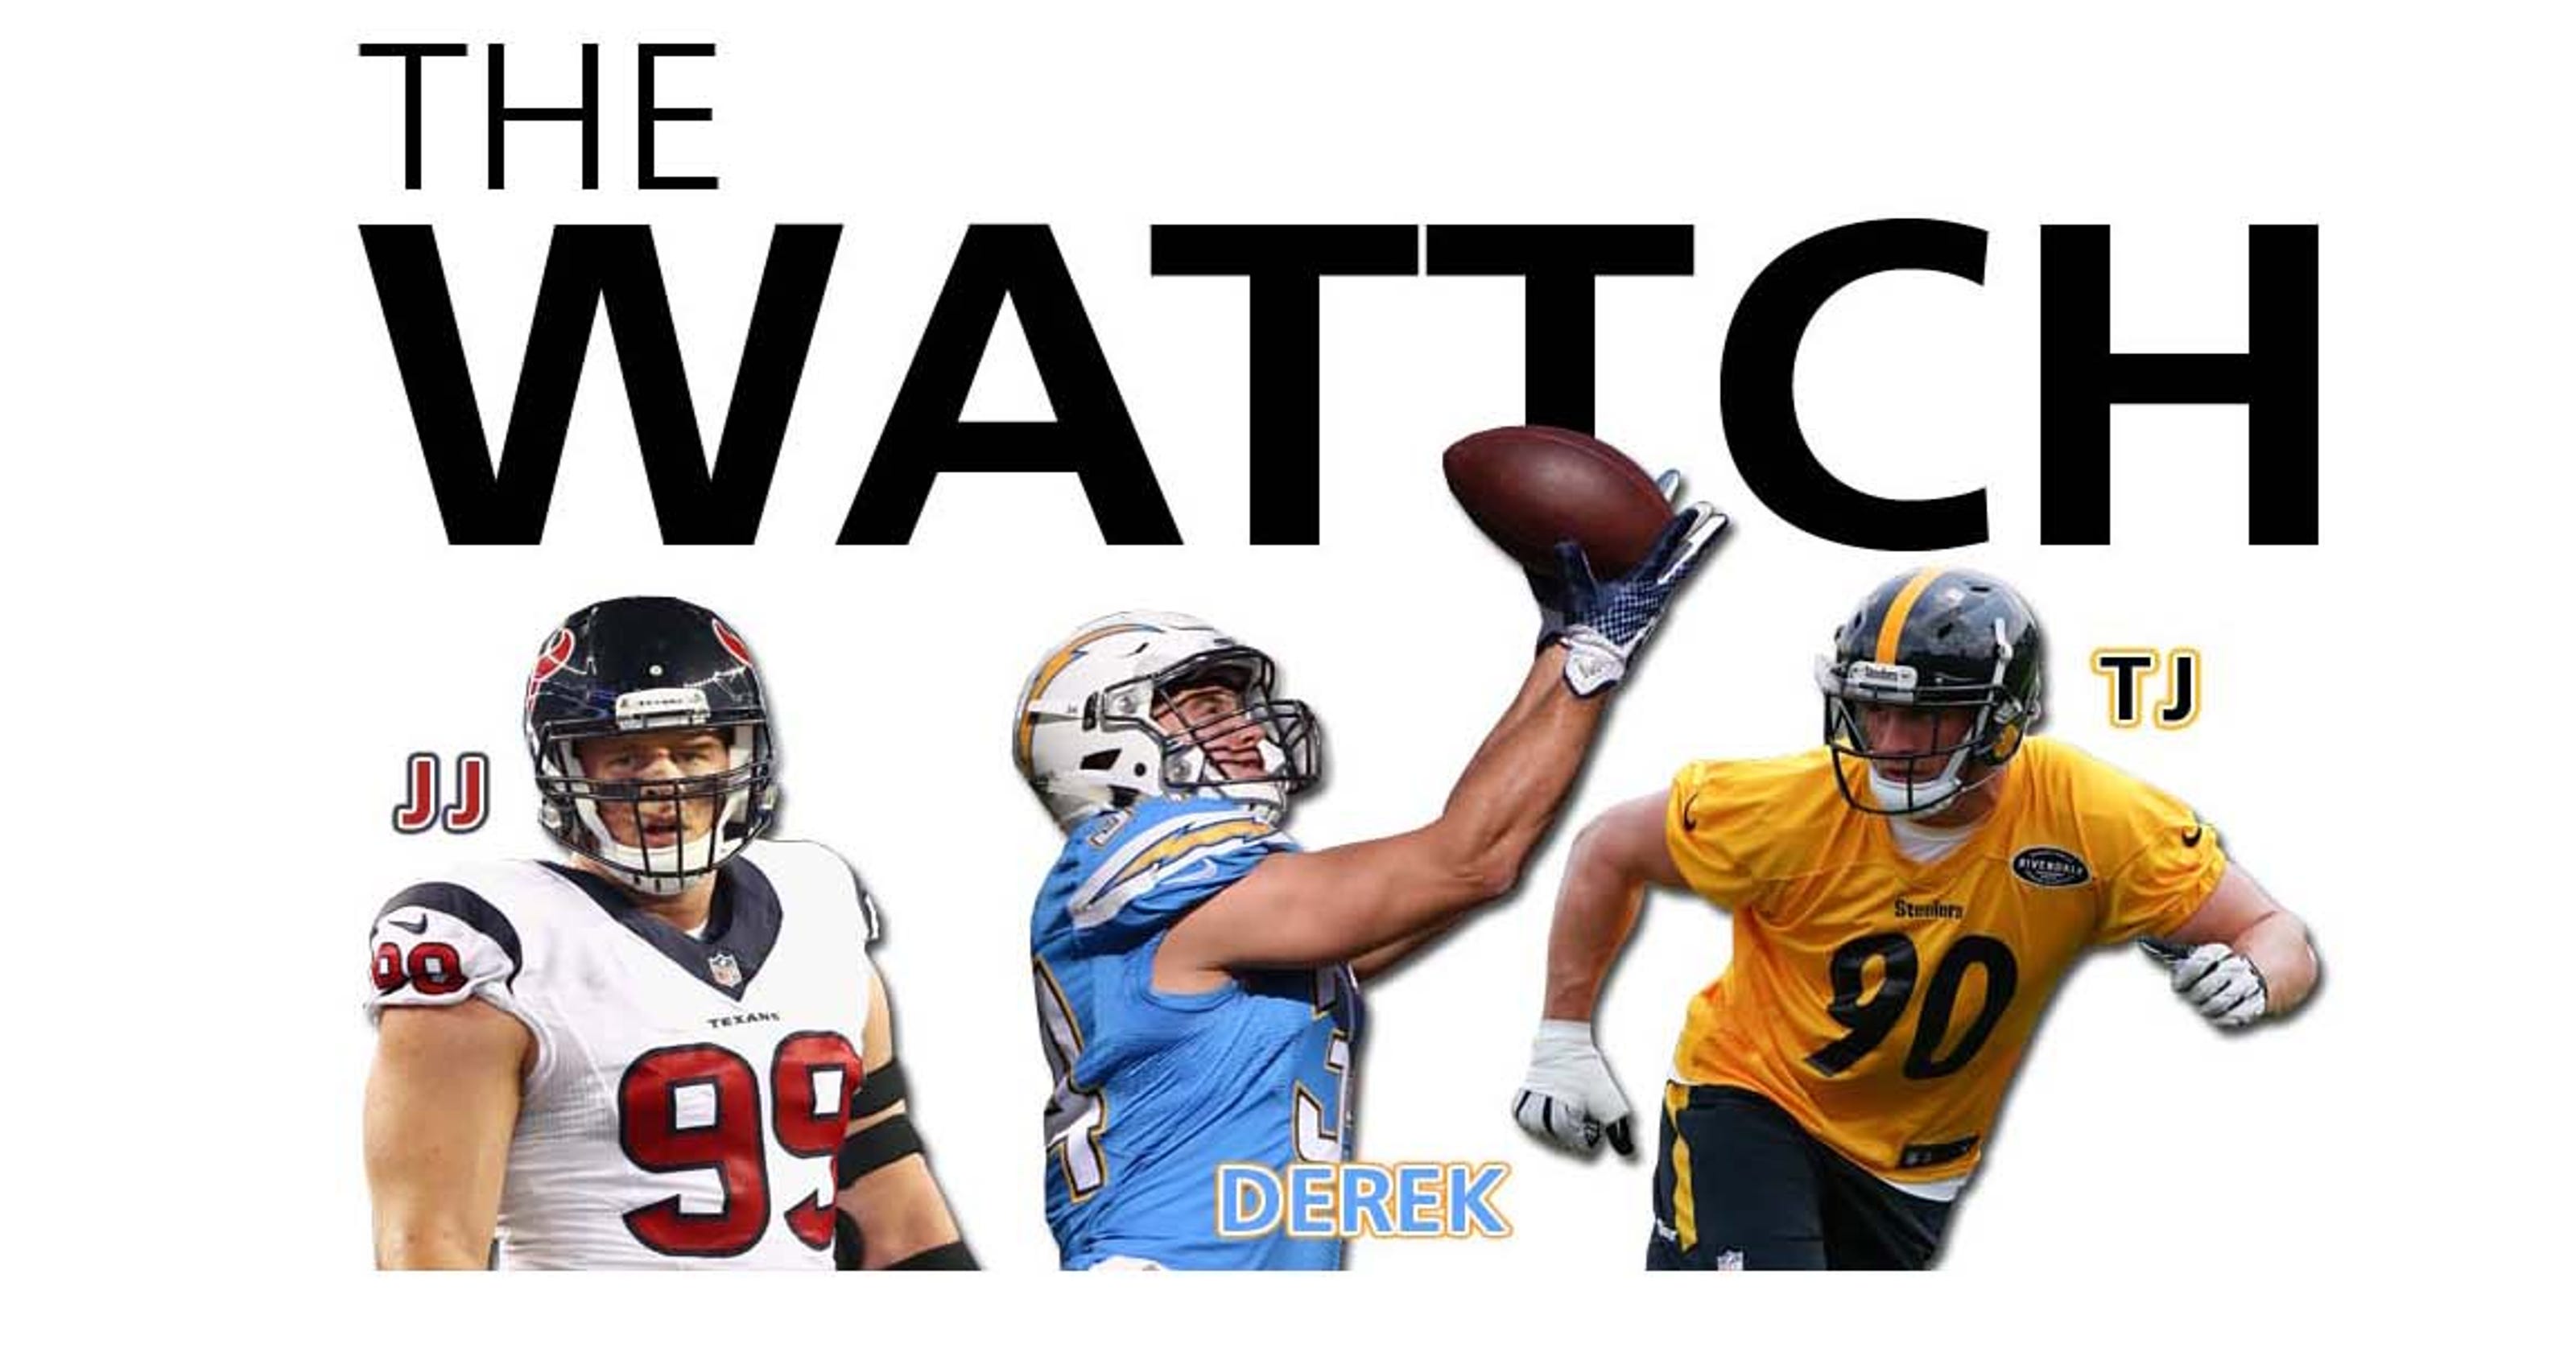 The Wattch: Checking in with Pewaukee brothers J.J., T.J. and Derek Watt